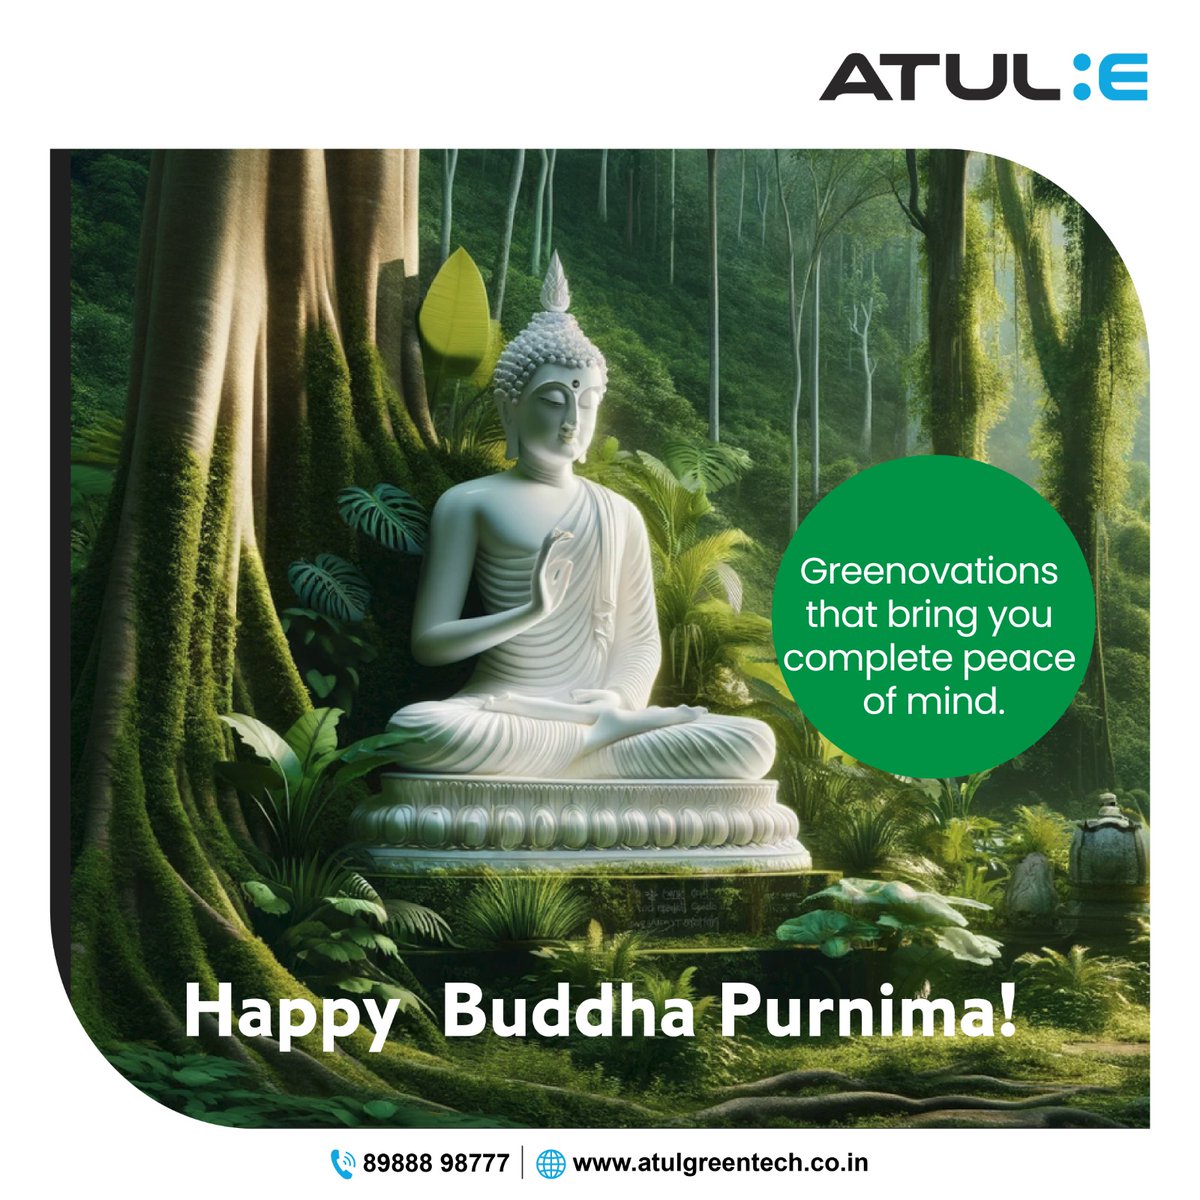 Experience tranquillity on the go with Atul Greentech. Om Mani Padme Hum. 
Happy Buddha Purnima!
#BuddhaPurnima #AtulGreentech #OmManiPadmeHum #Zen #Peace #Serenity #Purity #JourneyOfLife